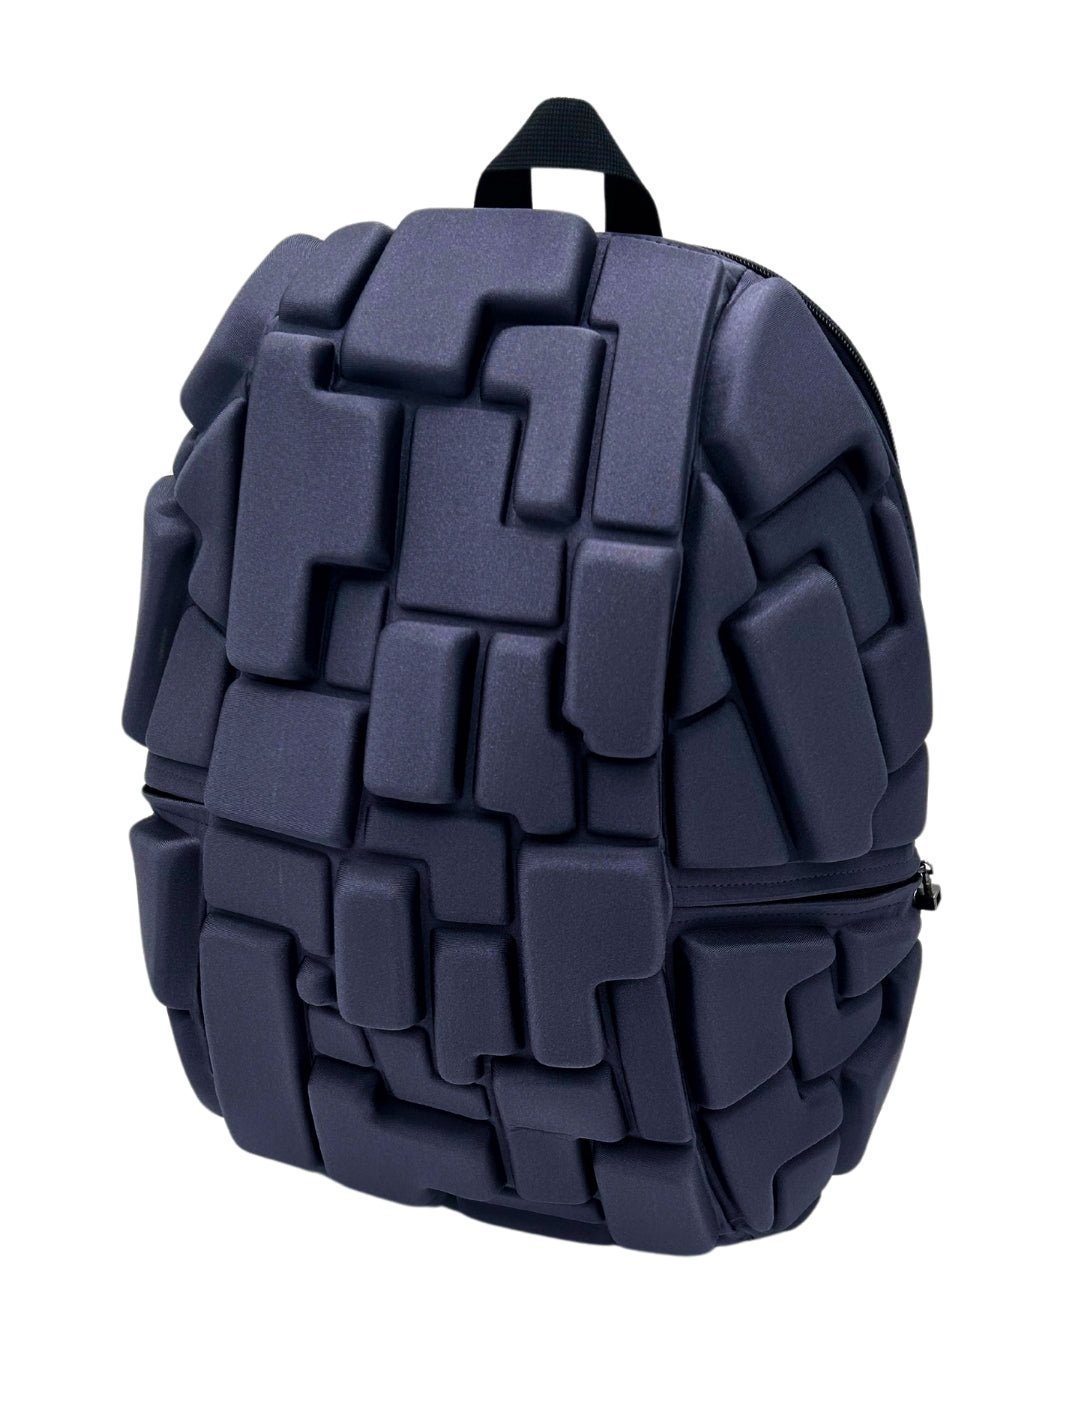 Outer Limits - gray backpack - Madpax